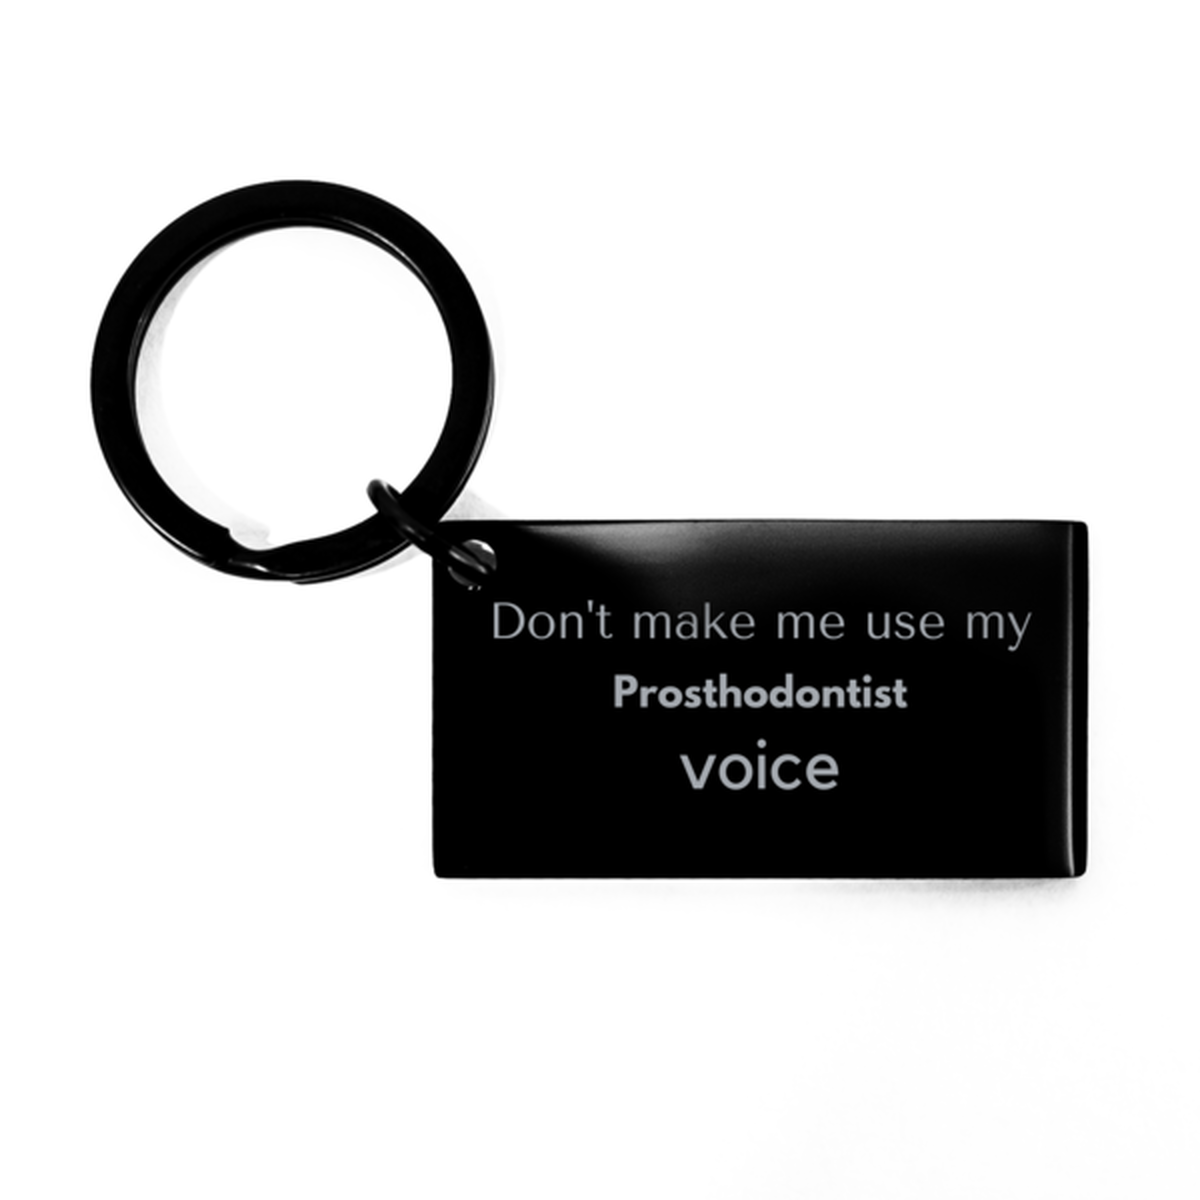 Don't make me use my Prosthodontist voice, Sarcasm Prosthodontist Gifts, Christmas Prosthodontist Keychain Birthday Unique Gifts For Prosthodontist Coworkers, Men, Women, Colleague, Friends